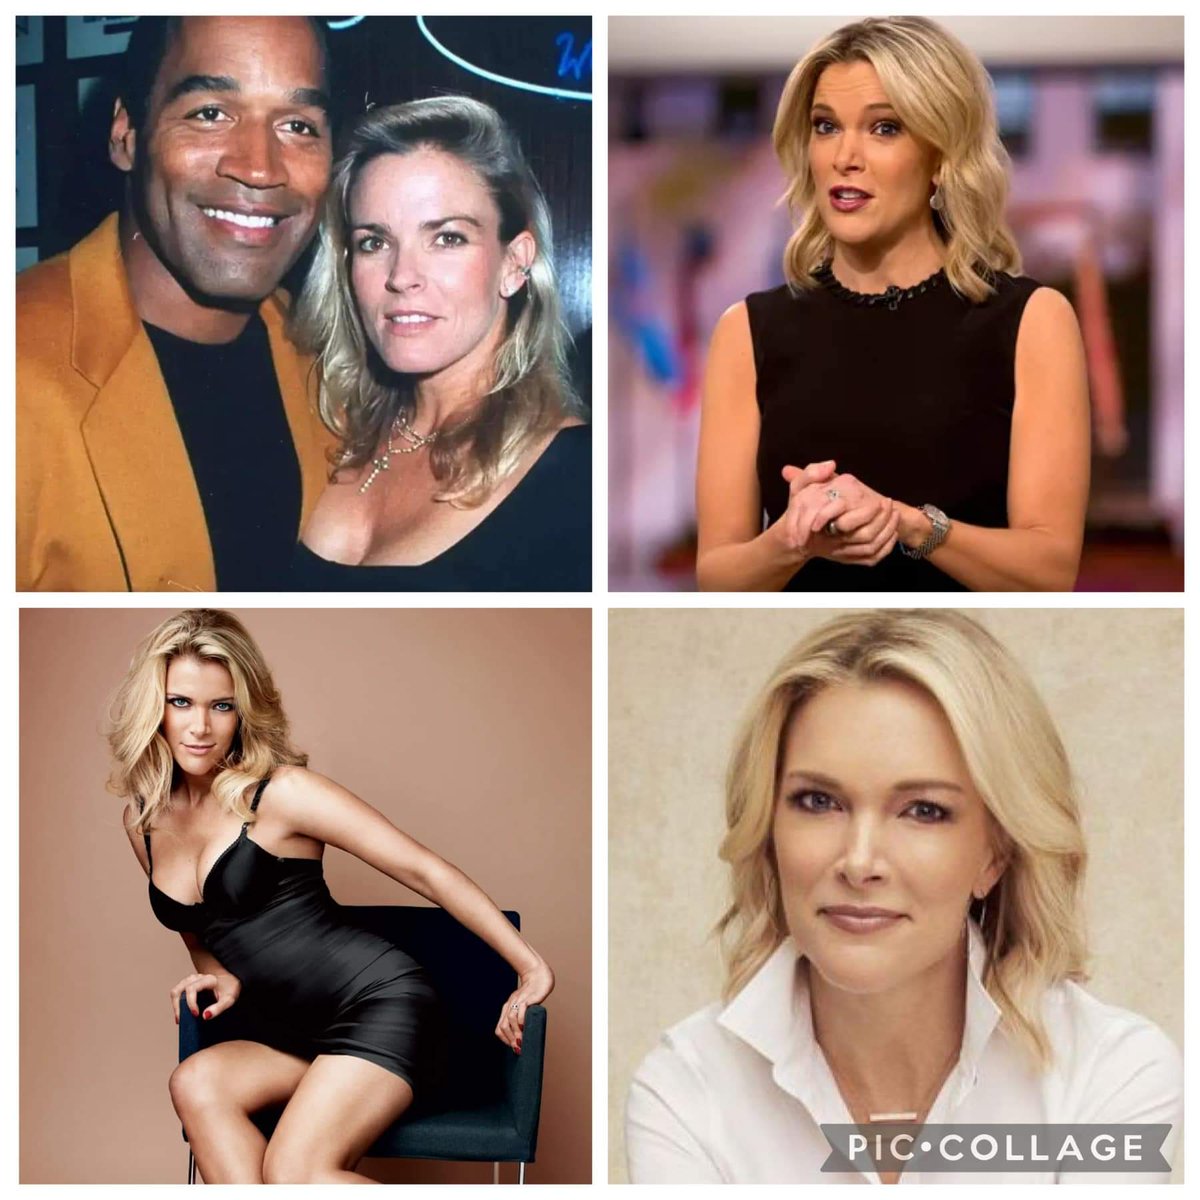 Nicole Brown Simpson (top left) vs Megyn Kelly. Thoughts?

A look-alike? A crisis actor? A clone? A Petri dish sibling? Or the same person?